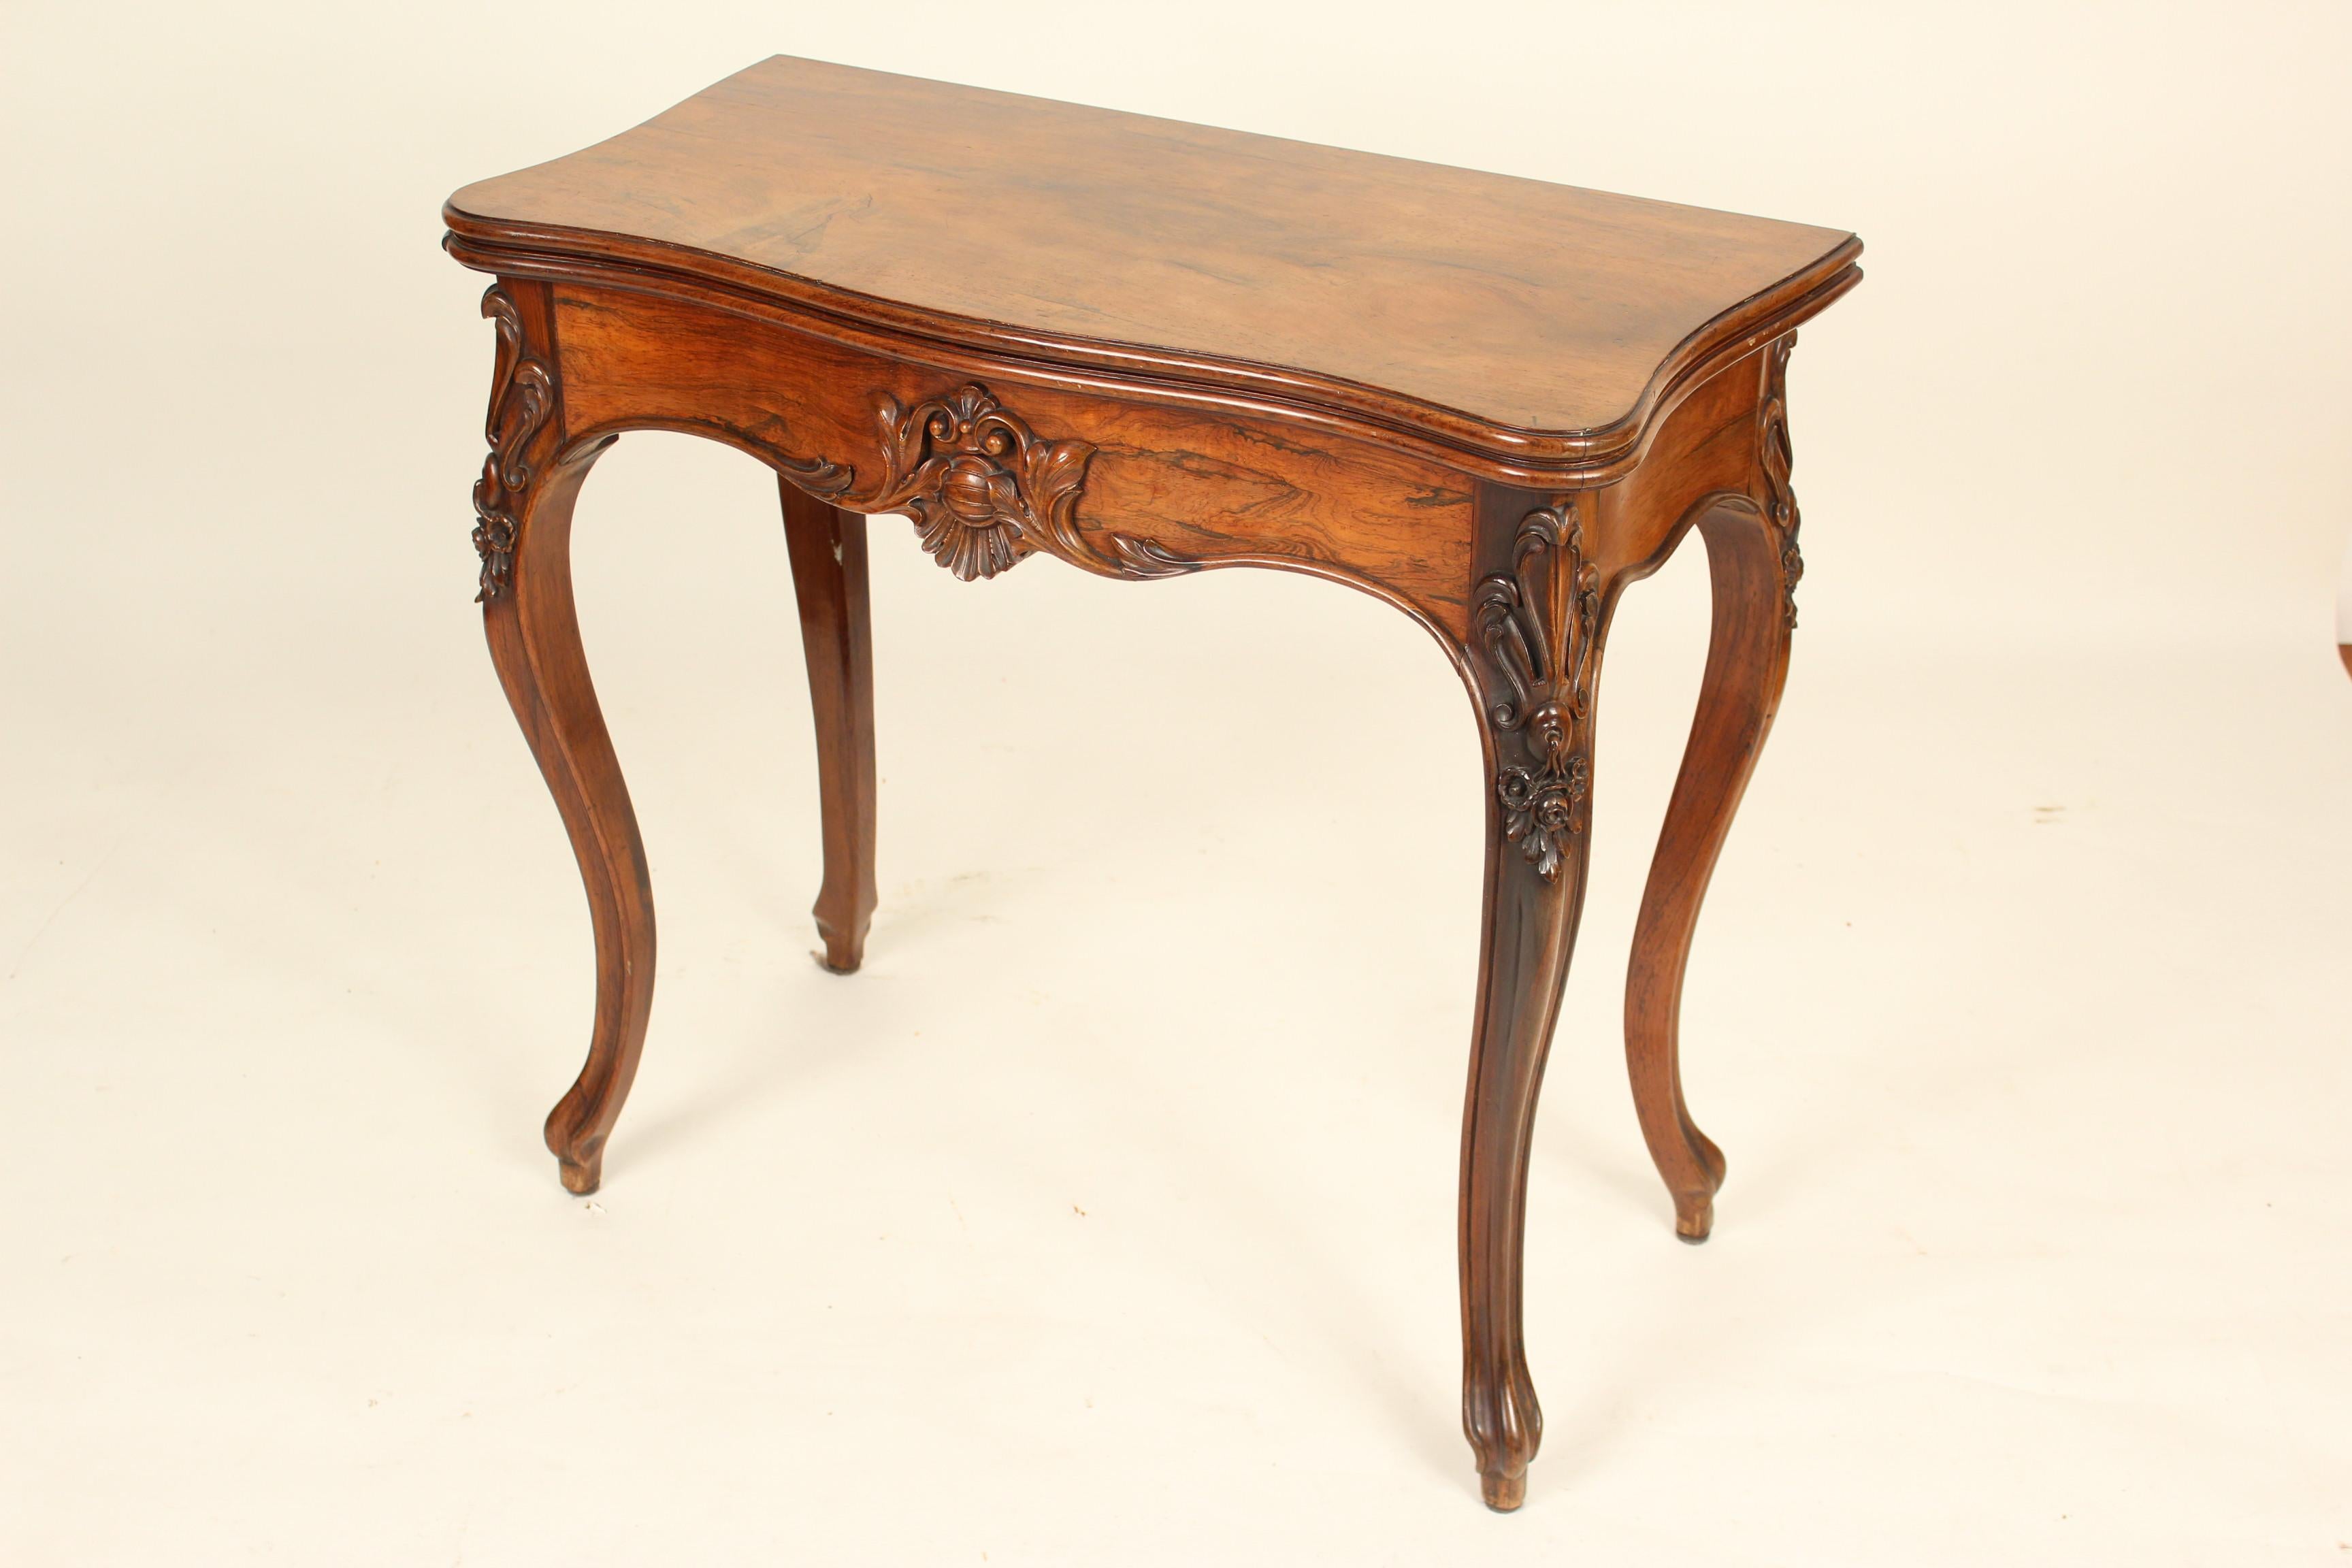 Louis XV style rosewood games table with concertina action, circa 1900. The rosewood on this games table has excellent color and grain. The interior on this games table is felt with a narrow tooled leather border. The height when the games table is